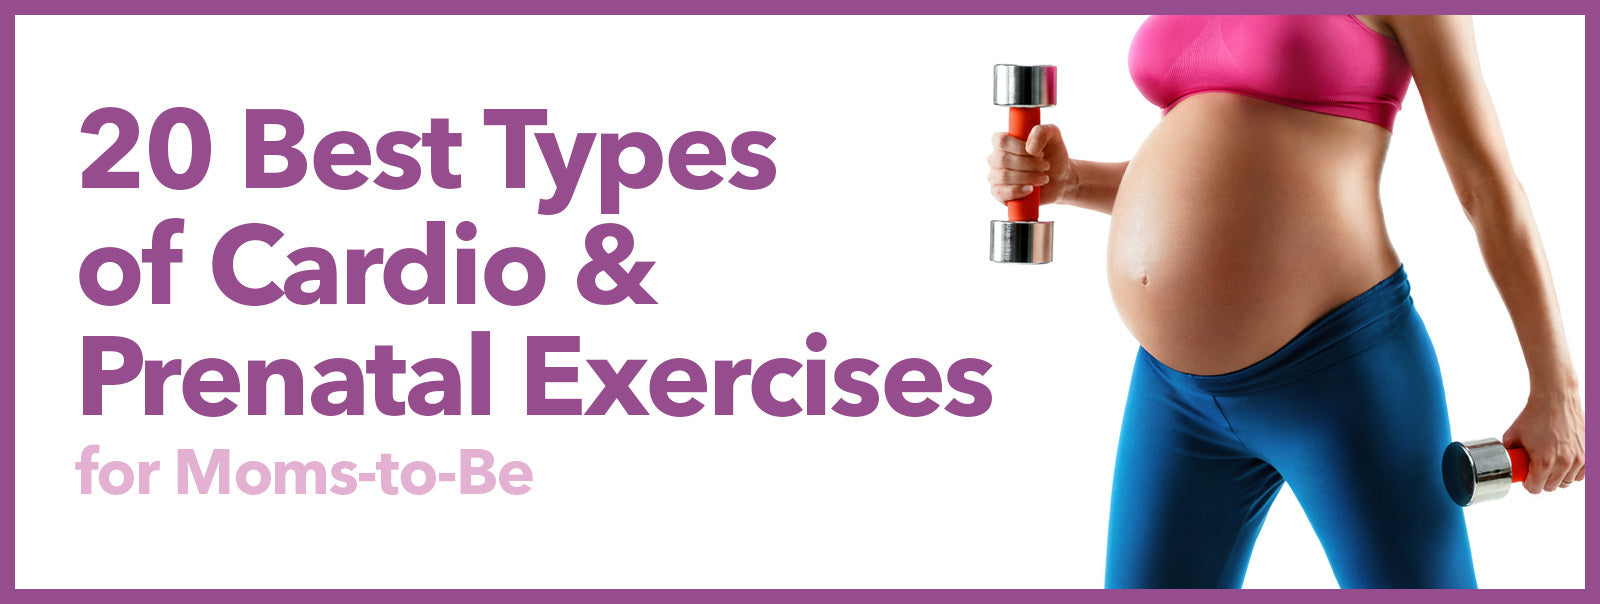 20 Best Types of Cardio and Prenatal Exercises for Moms-to-Be